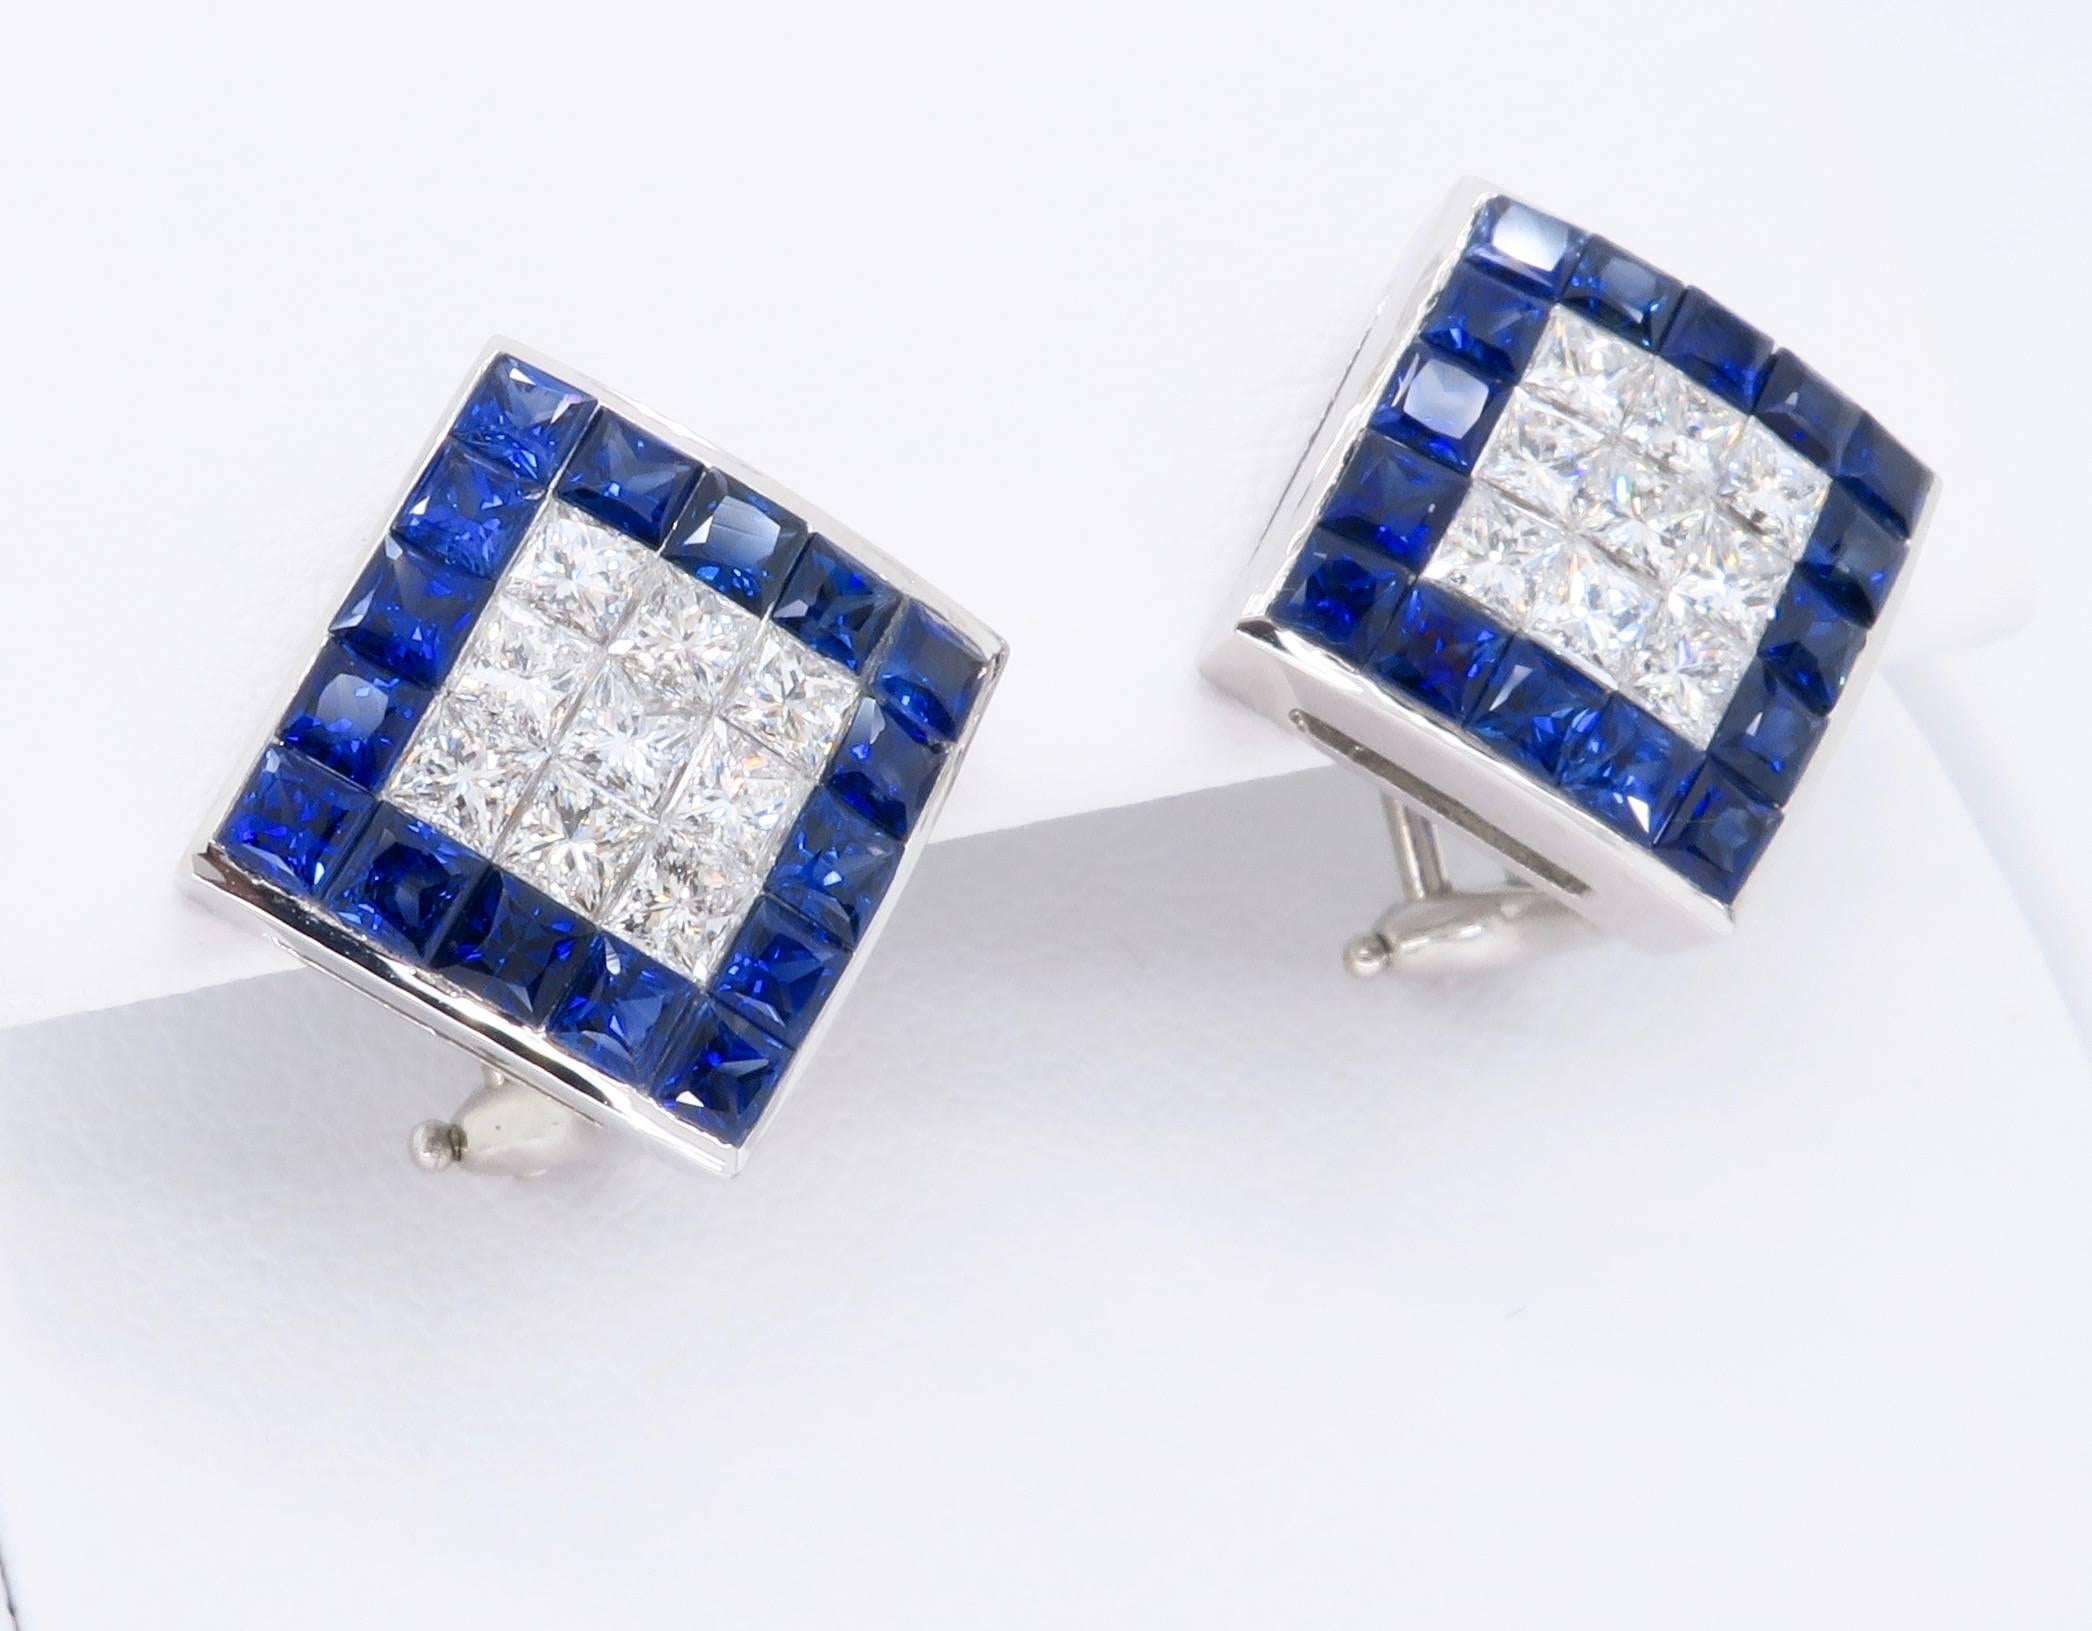 Gorgeous pair of 18K white gold diamond and sapphire earrings.  Each stunning earring houses 9 beautiful Princess Cut Diamonds and 16 blue lab created sapphires. The vivid blue sapphires surround approximately 1.44CTW of diamonds. The diamonds